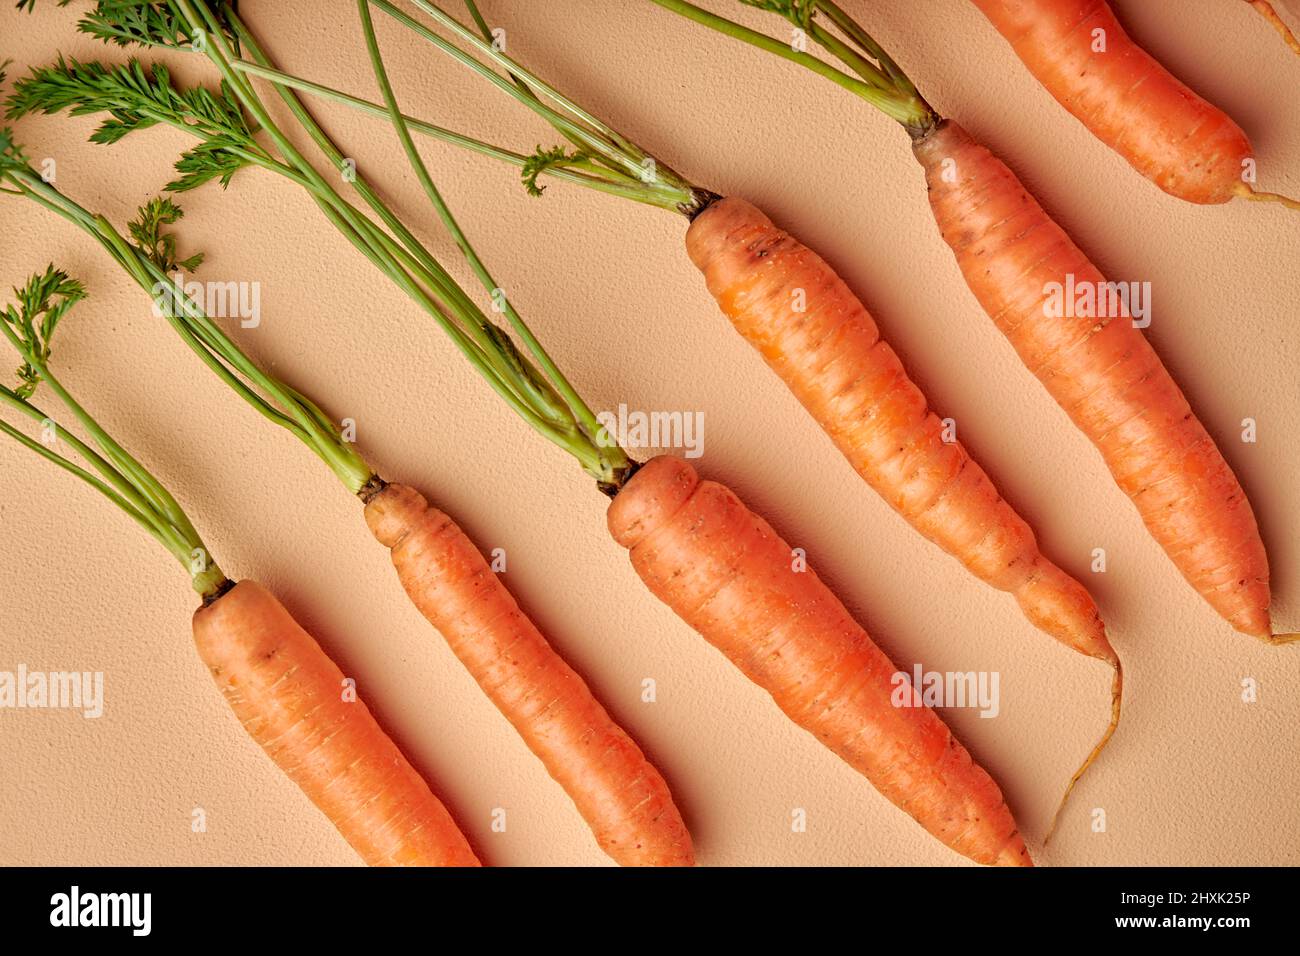 Fresh carrots with green leaves isolated on pastel orange background. Vegetable. Food, nutrition concept. flat lay, copy space. Stock Photo